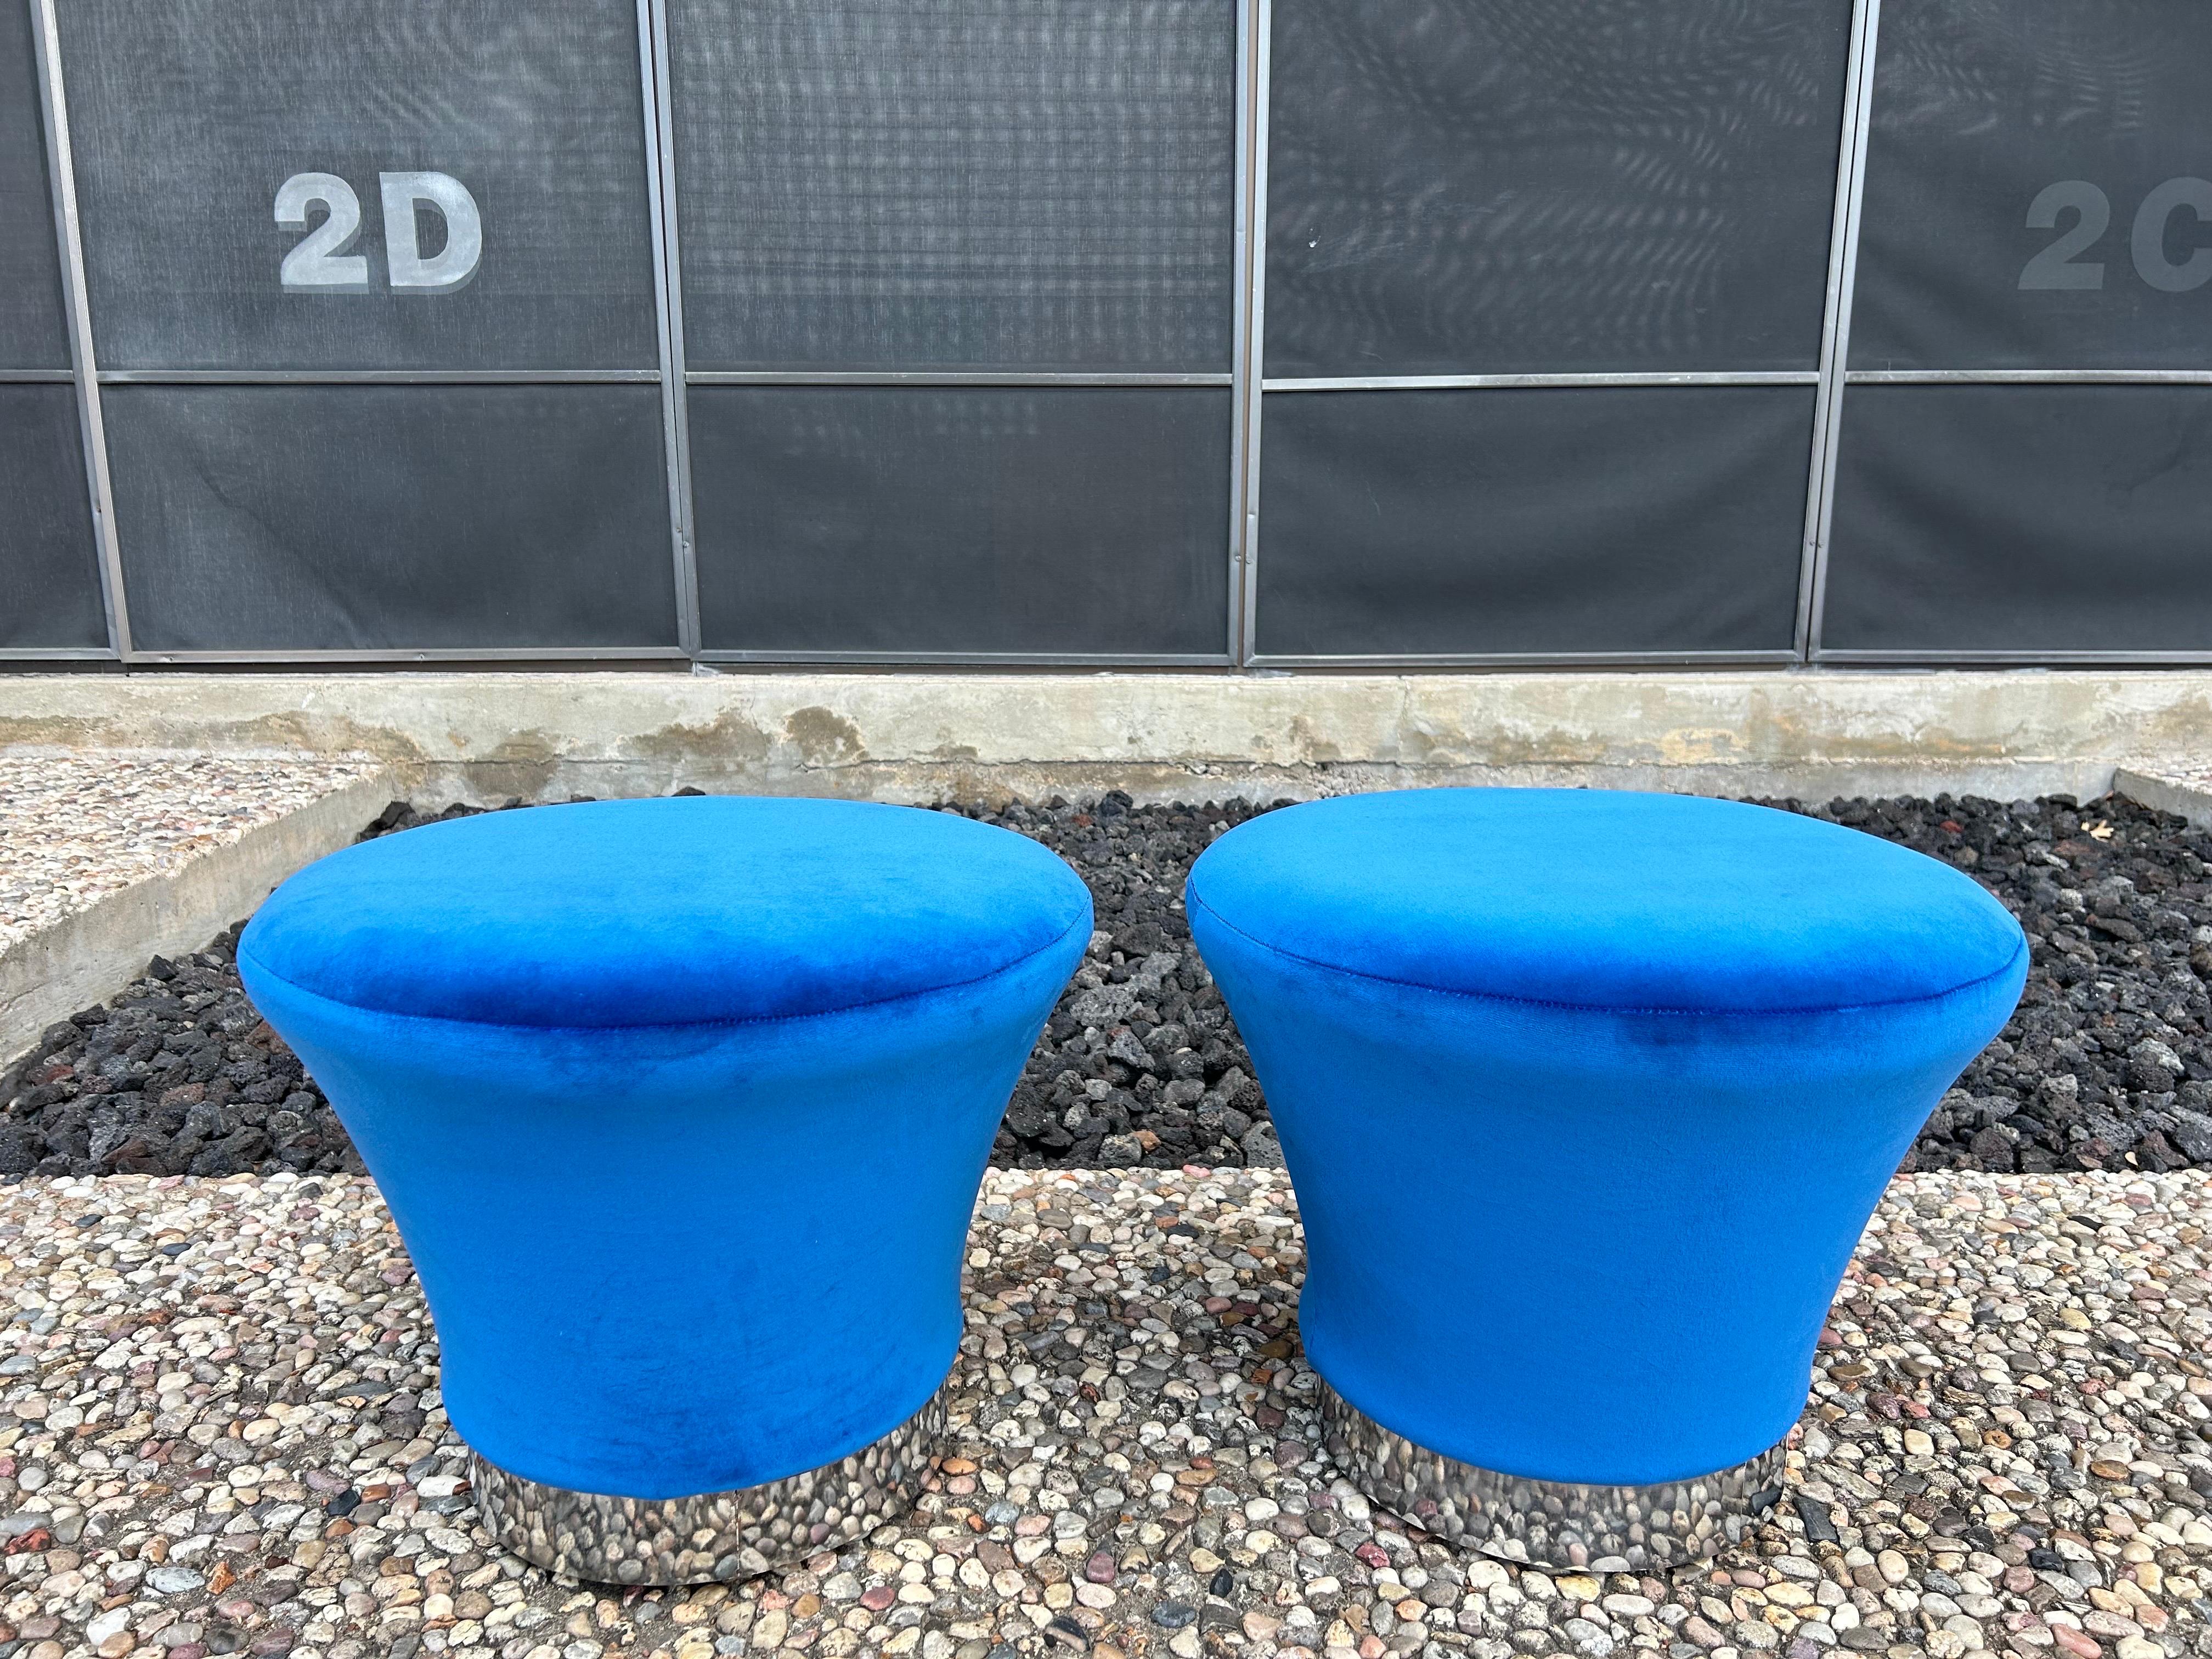 Pair Of Pierre Paulin Style Mushroom Ottomans.
This great pair of mid century modern mushroom ottomans or poufs with chrome bases have been newly upholstered in plush blue velvet.
Beautiful accent ottomans or for extra seating when needed.